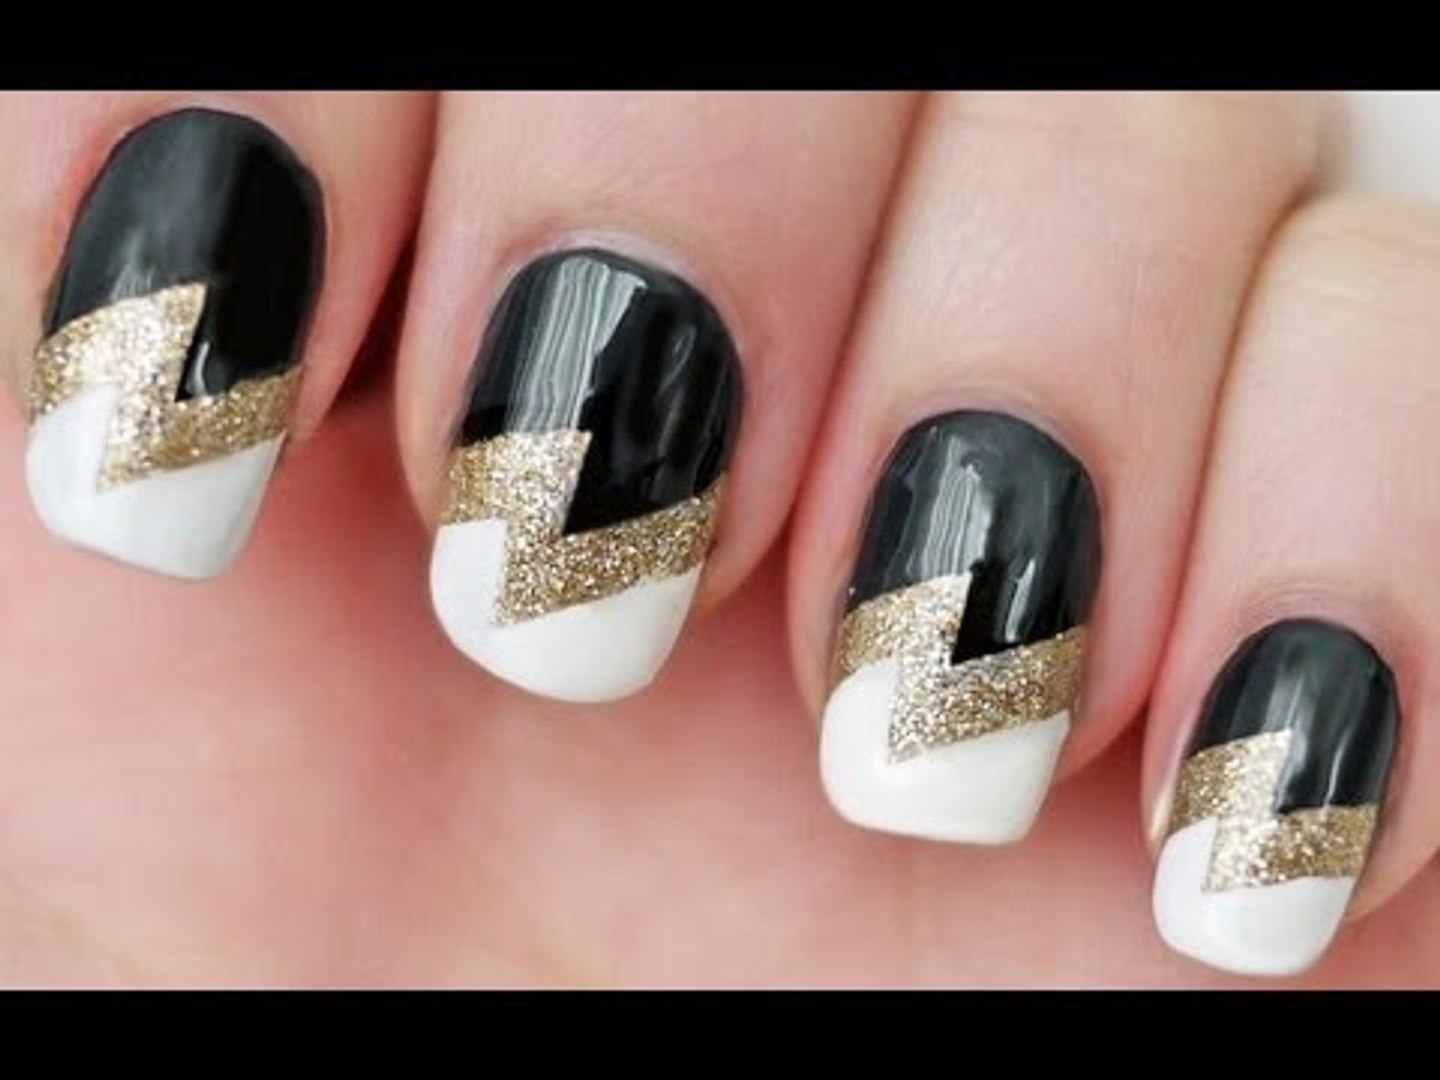 DIY NAIL ART_ Cute Nail Art Design using Scotch Tape! - Easy Nail Designs  You Can Do With Scotch Tape - video Dailymotion